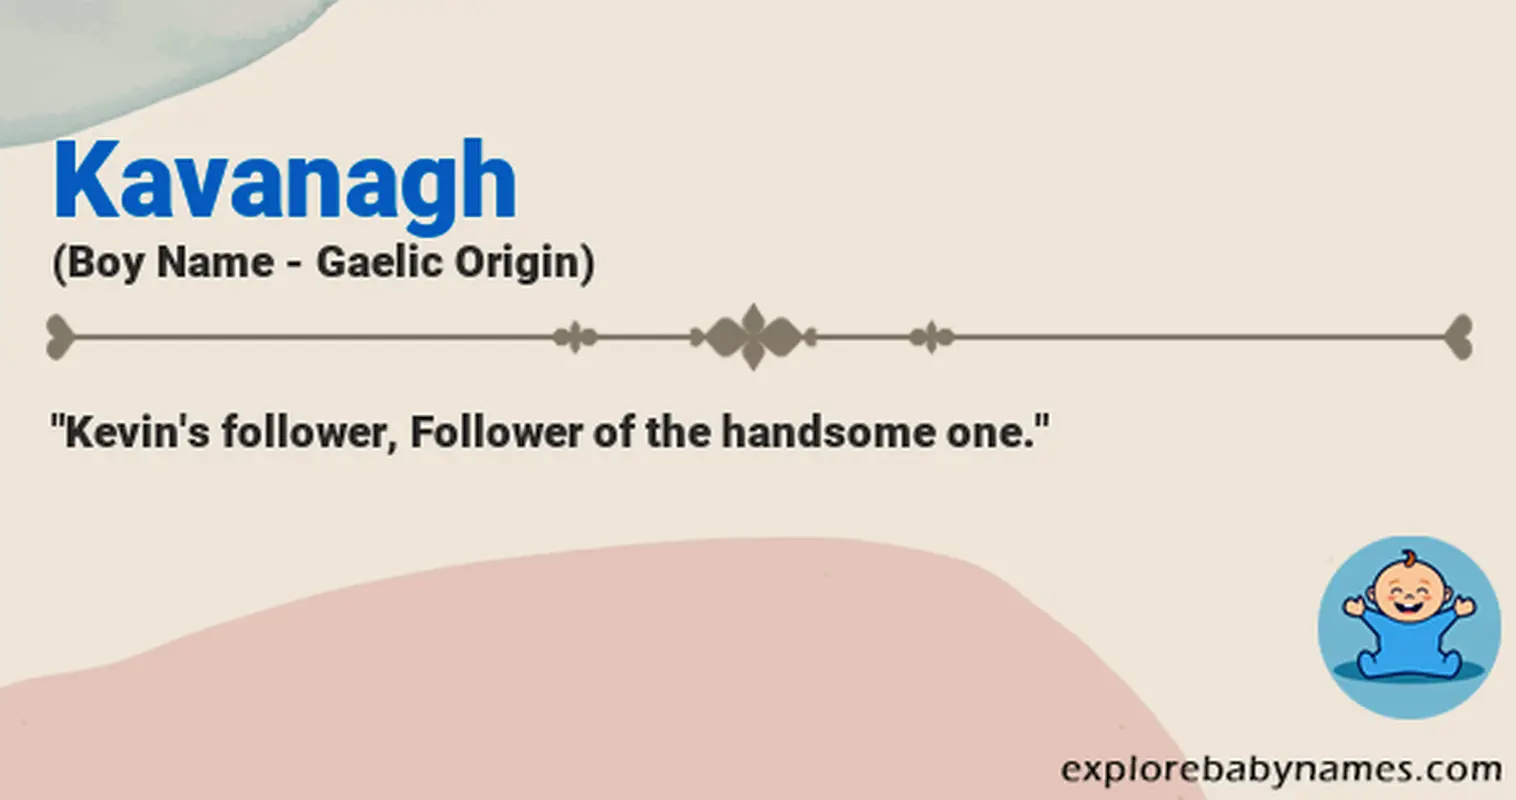 Meaning of Kavanagh